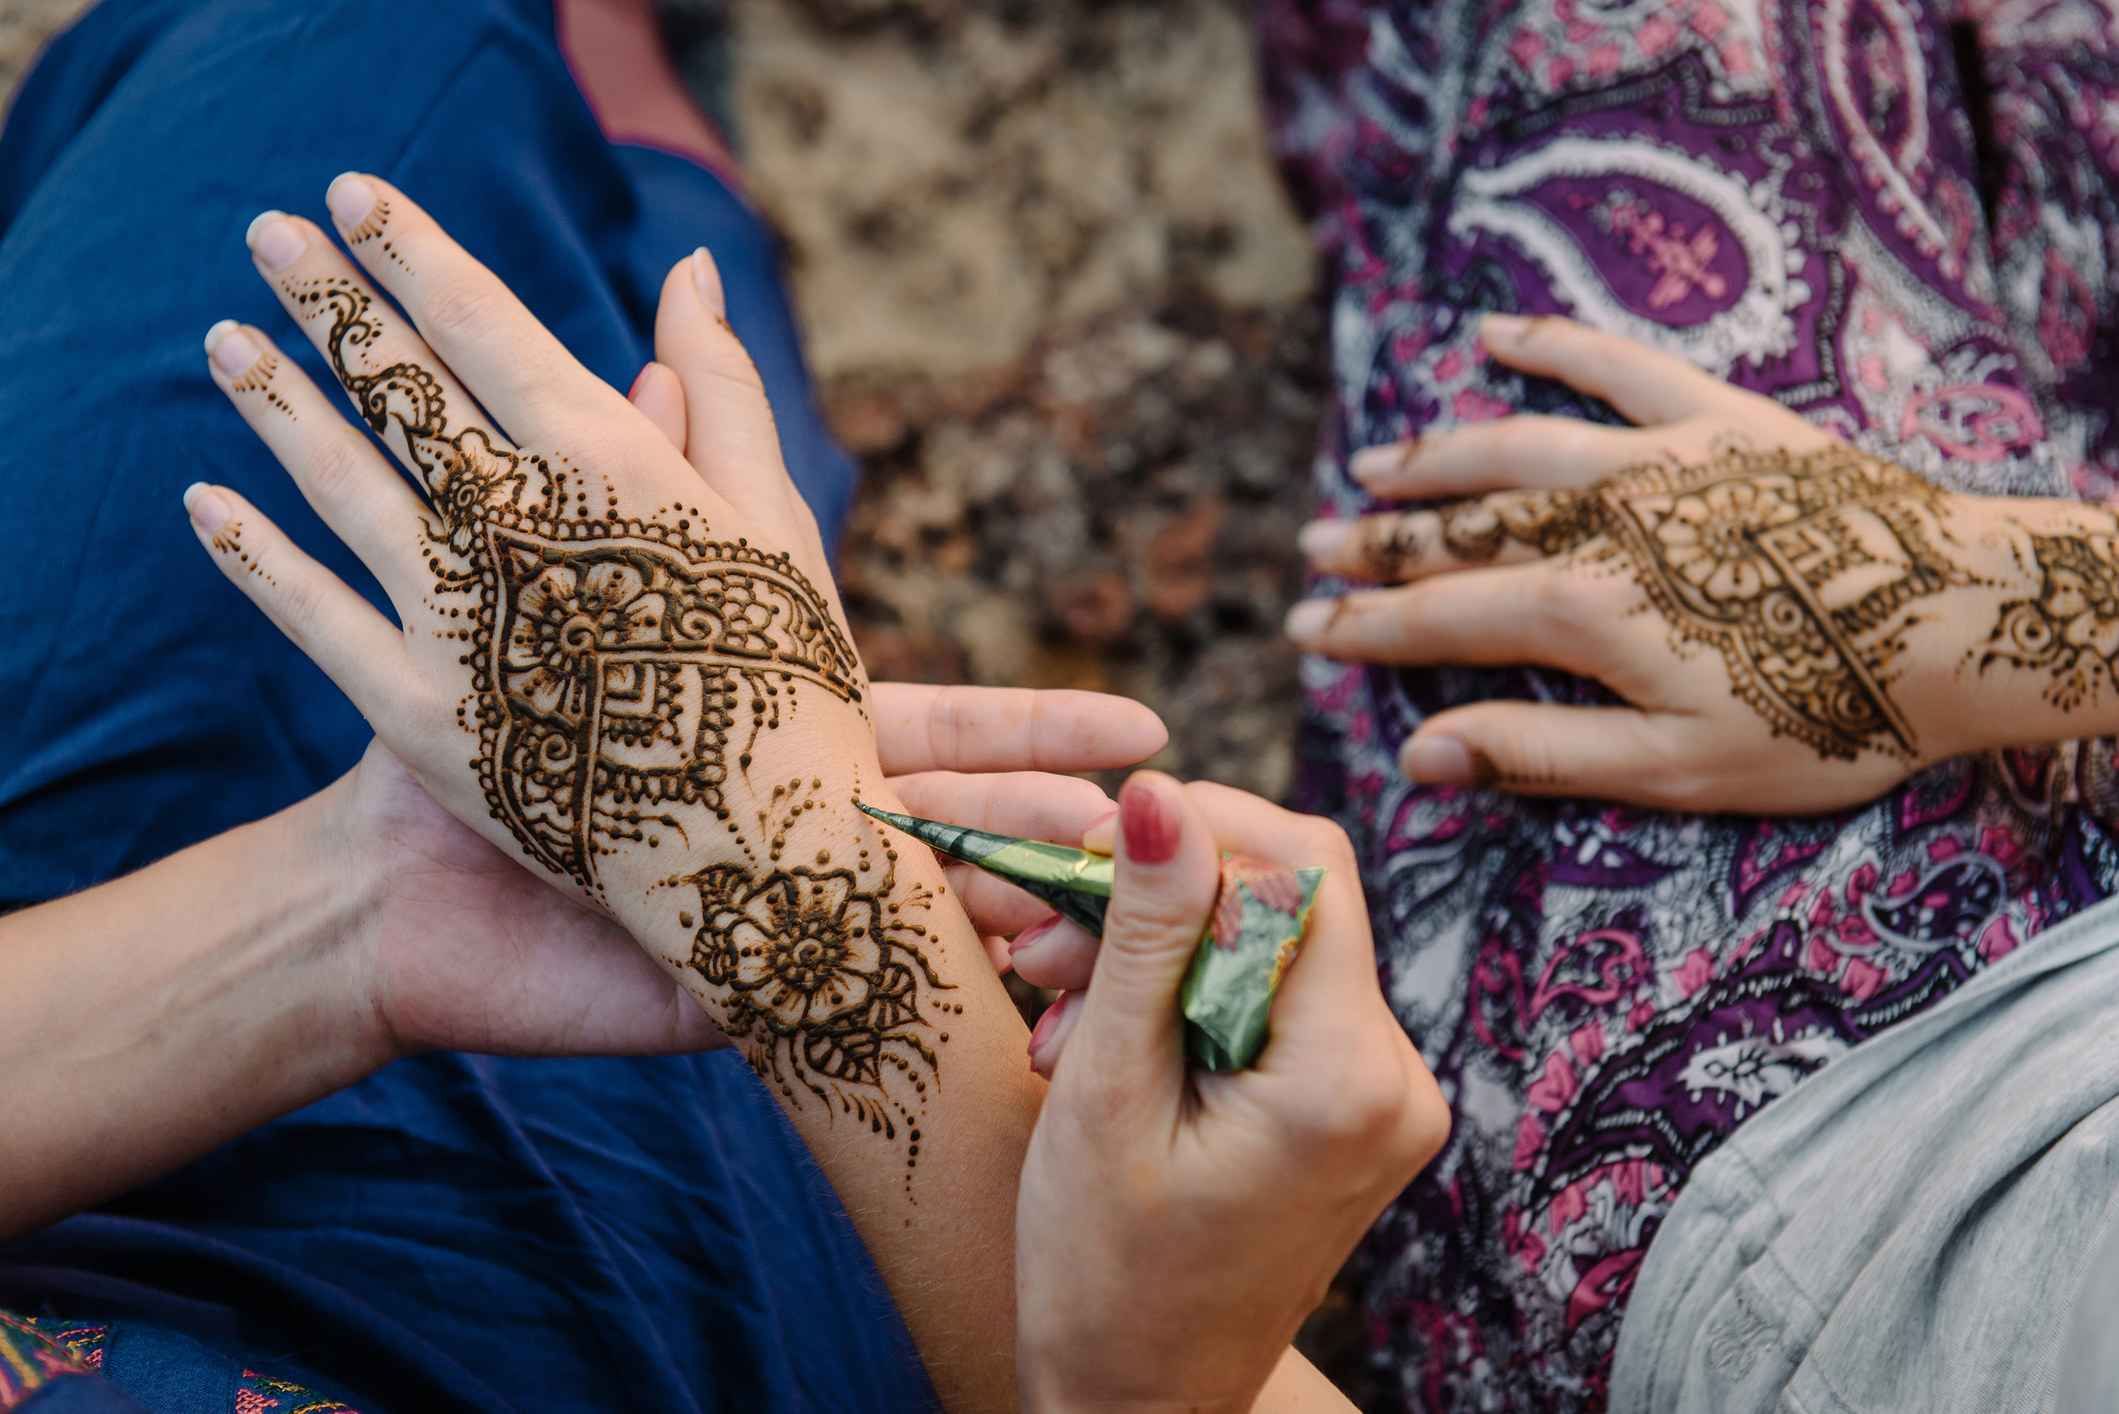 A woman applying henna to another person sitting beside her